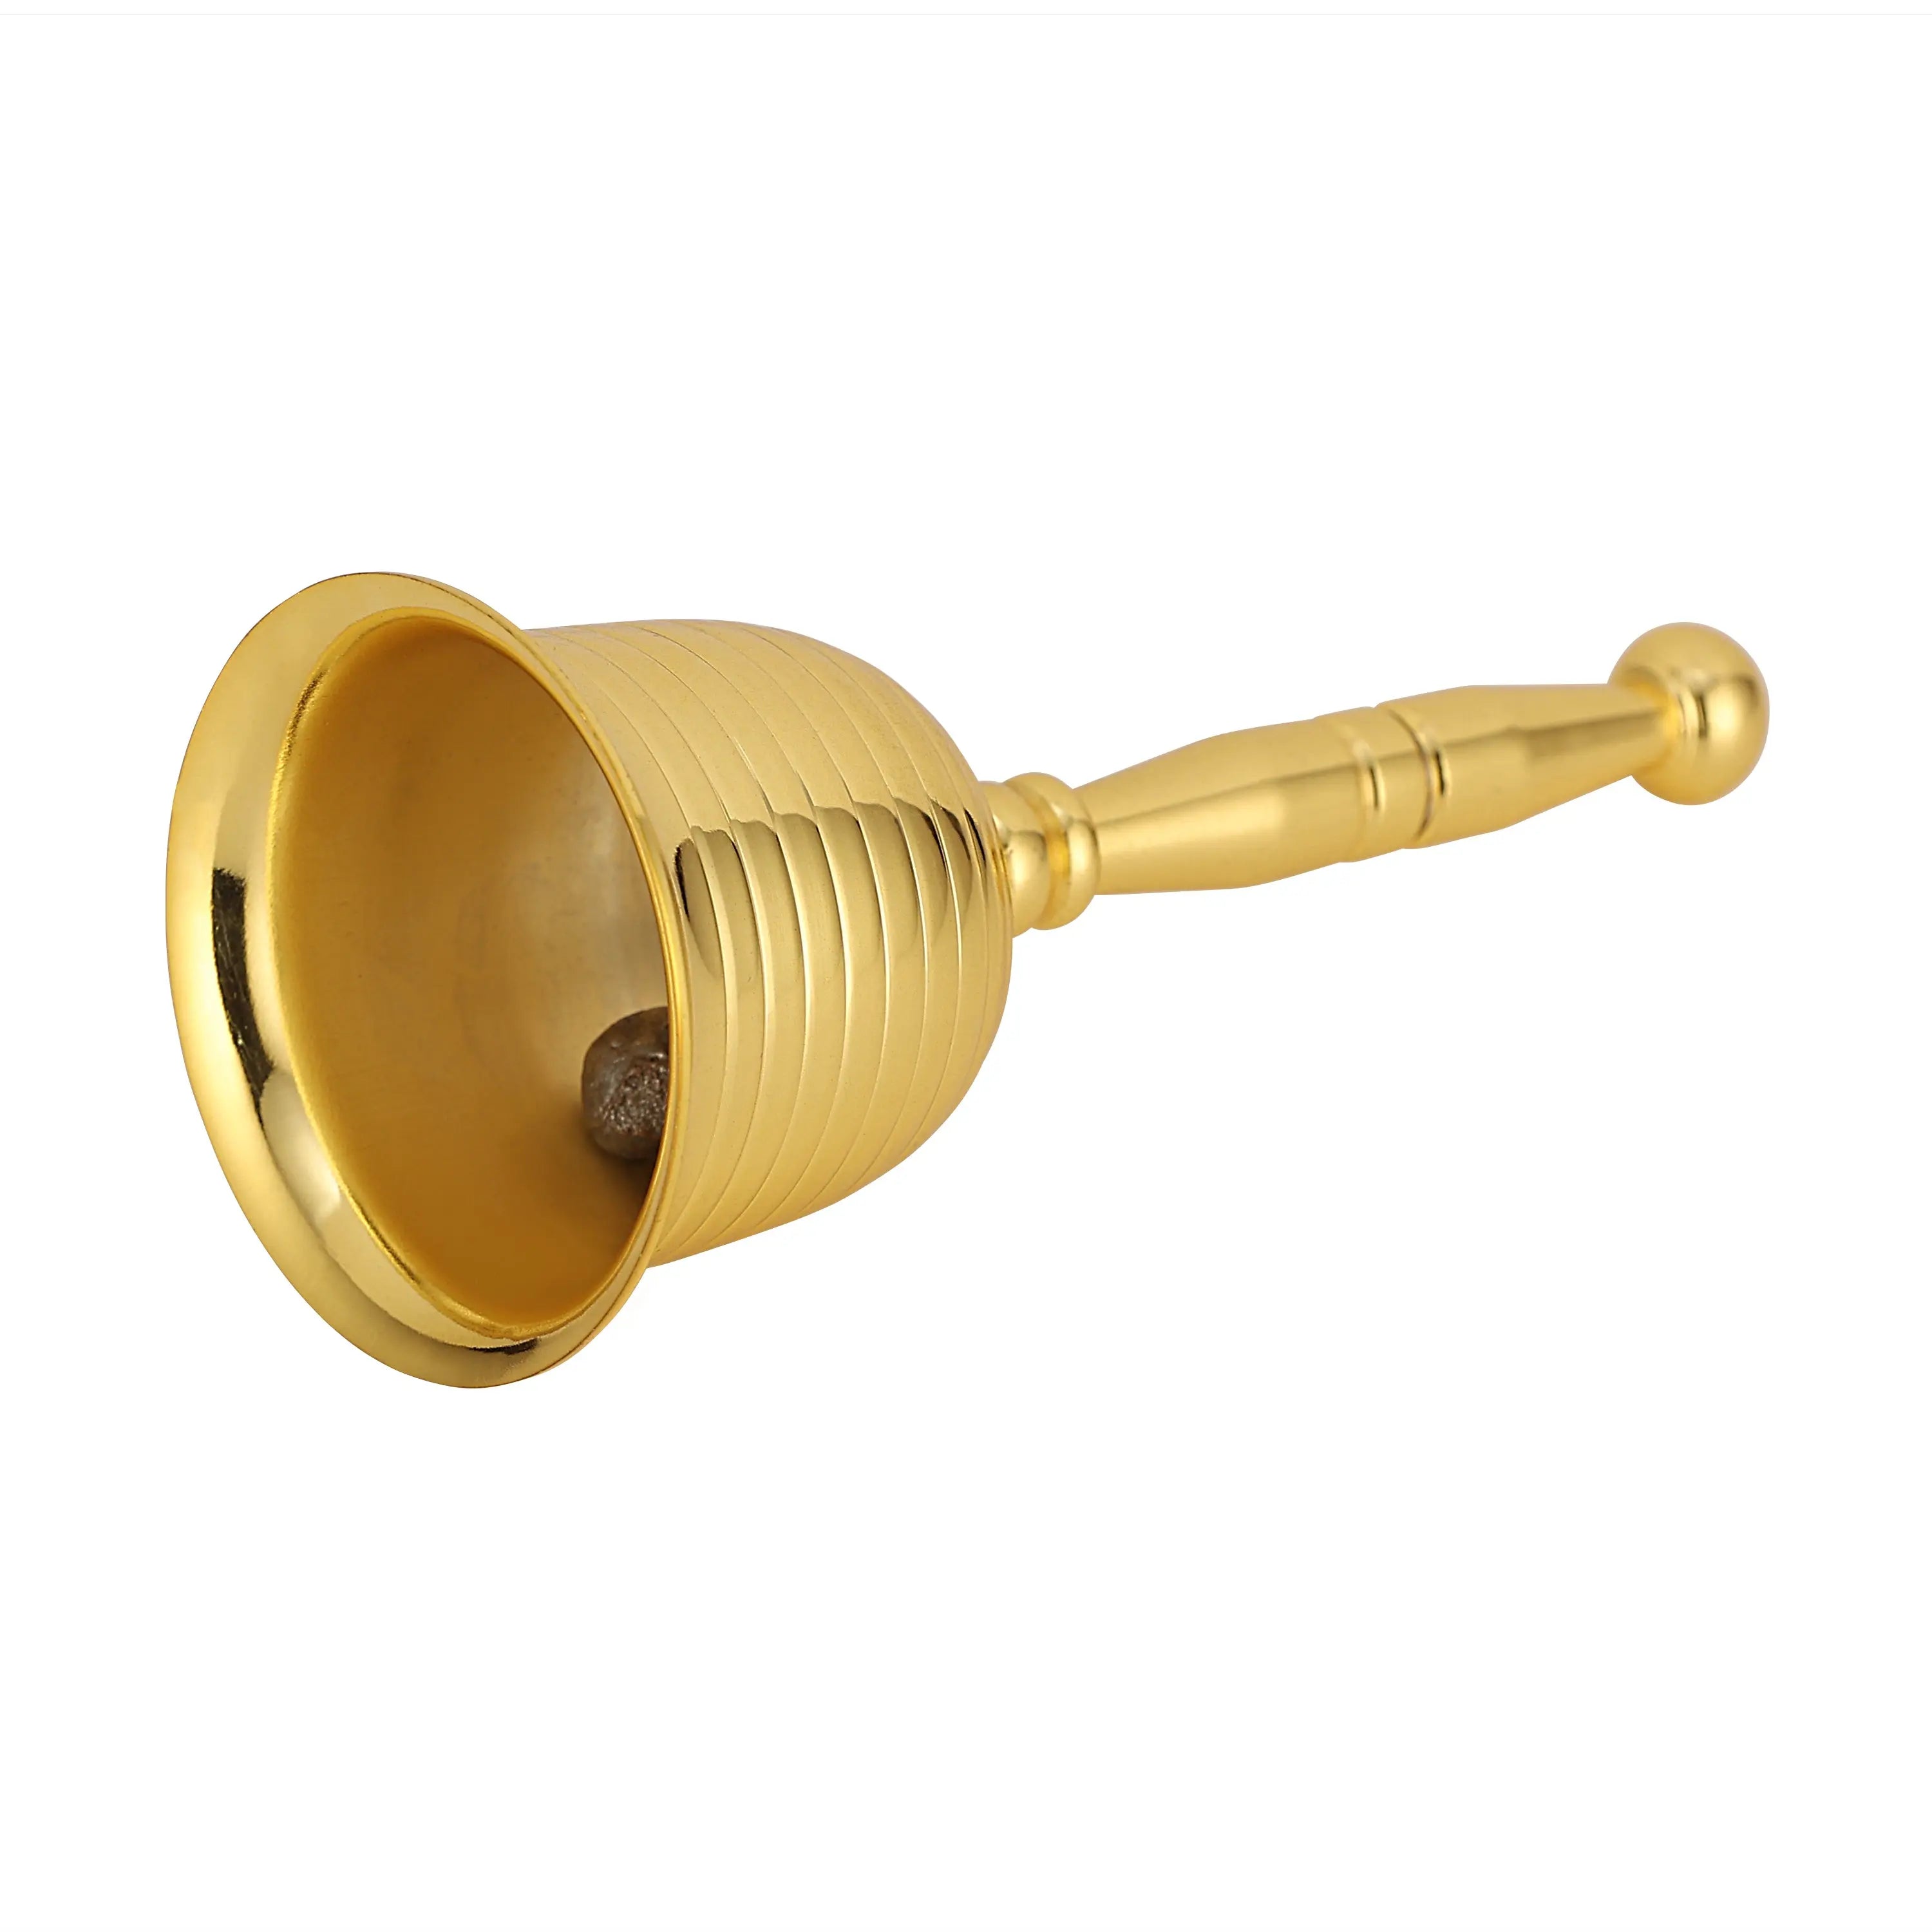 STAINLESS STEEL POOJA BELL GOLD - CROCKERY WALA AND COMPANY 